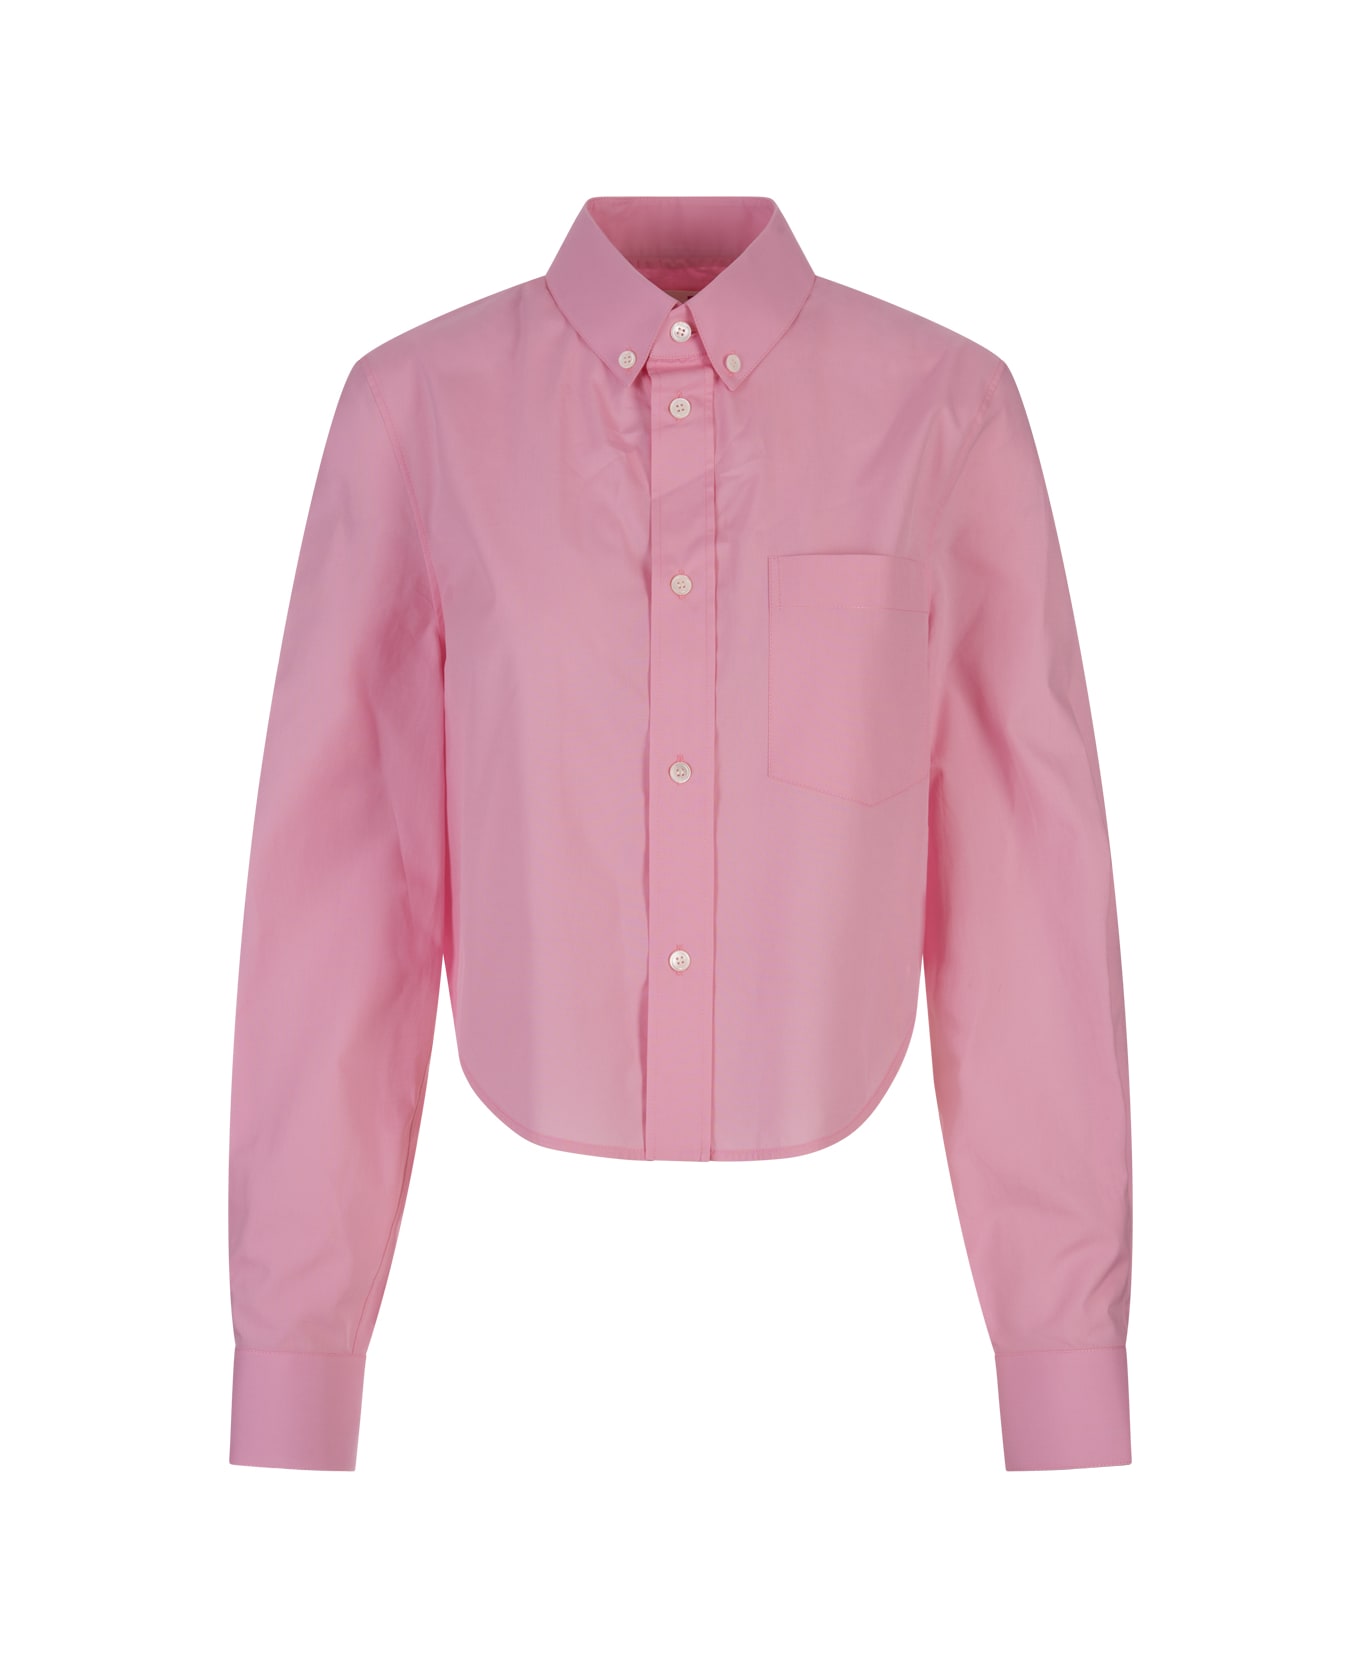 Marni Cropped Shirt In Pink Cotton - Pink